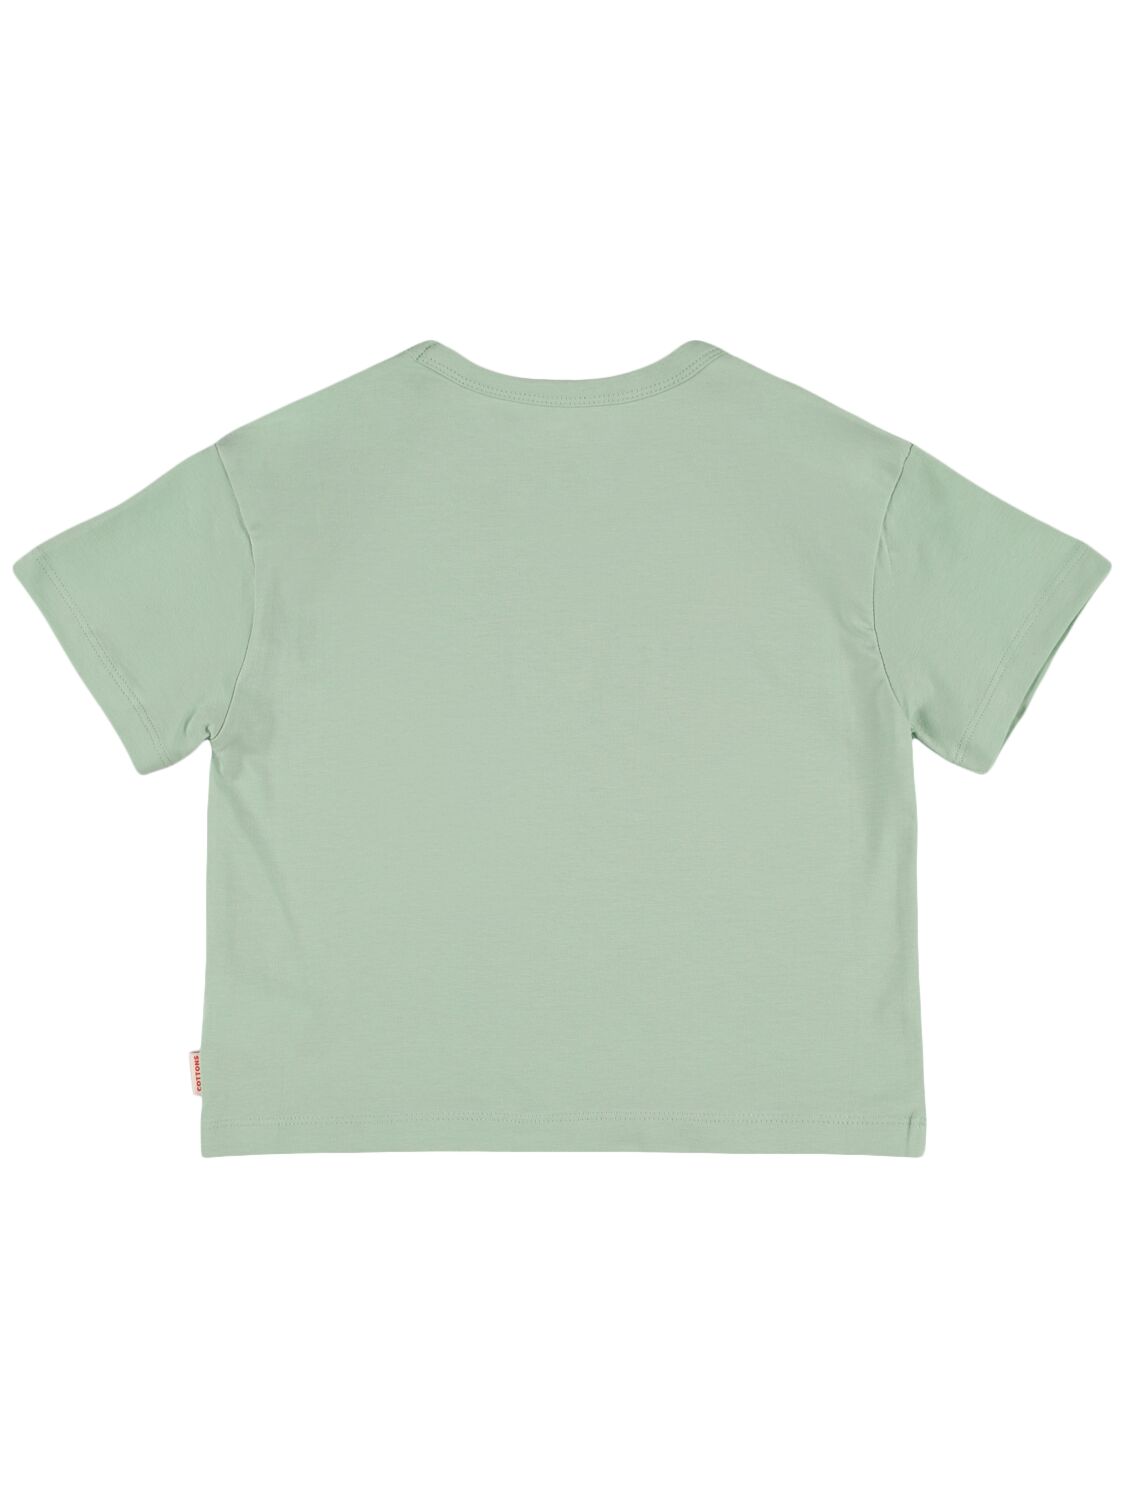 Shop Tiny Cottons Printed Organic Cotton T-shirt In Green